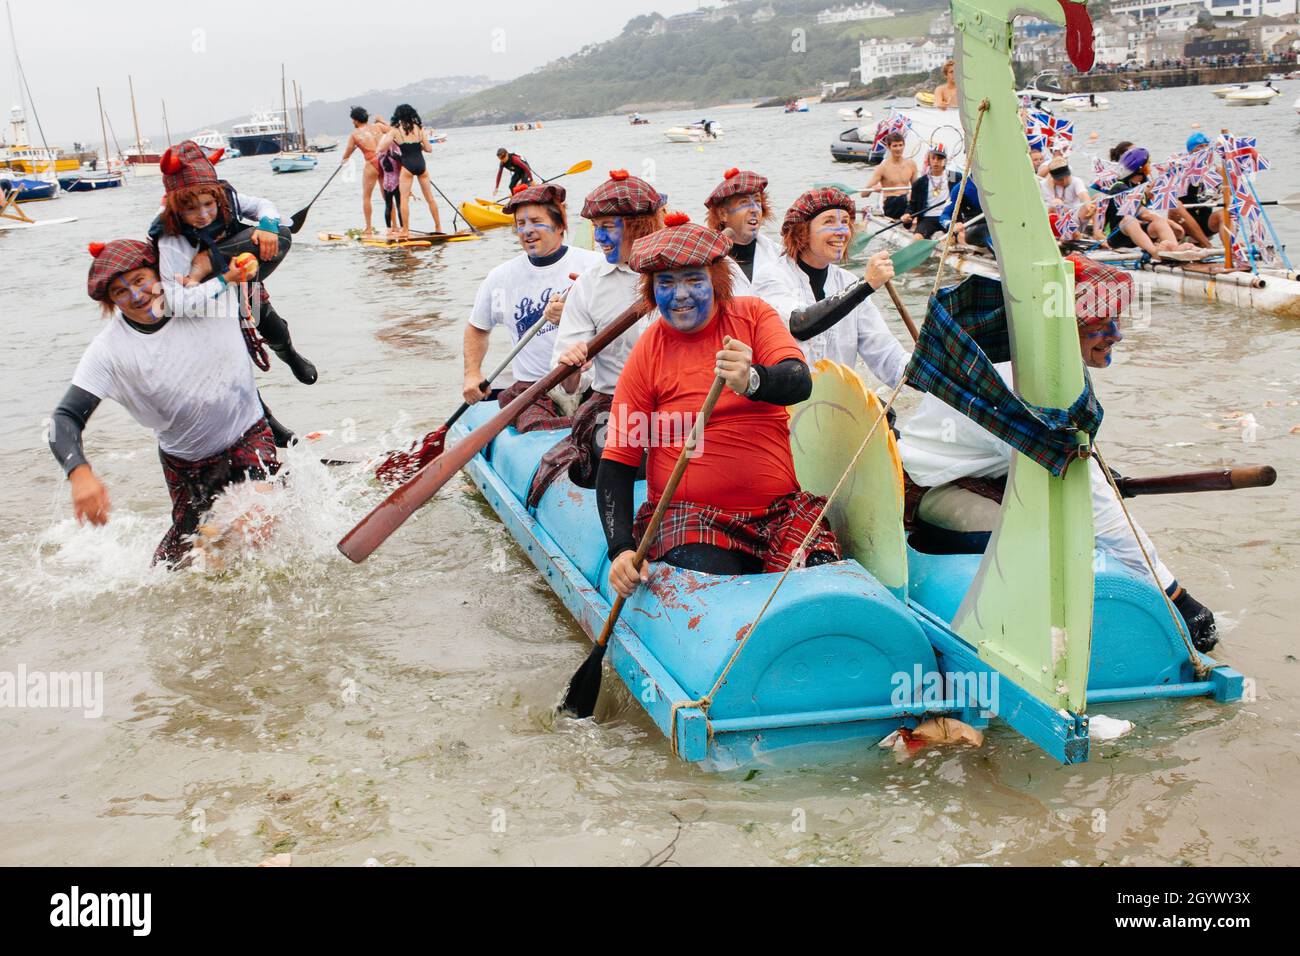 Annual St Ives raft race which takes place in the harbour with spectators throwing flour bombs at participants as they paddle around the course. Stock Photo